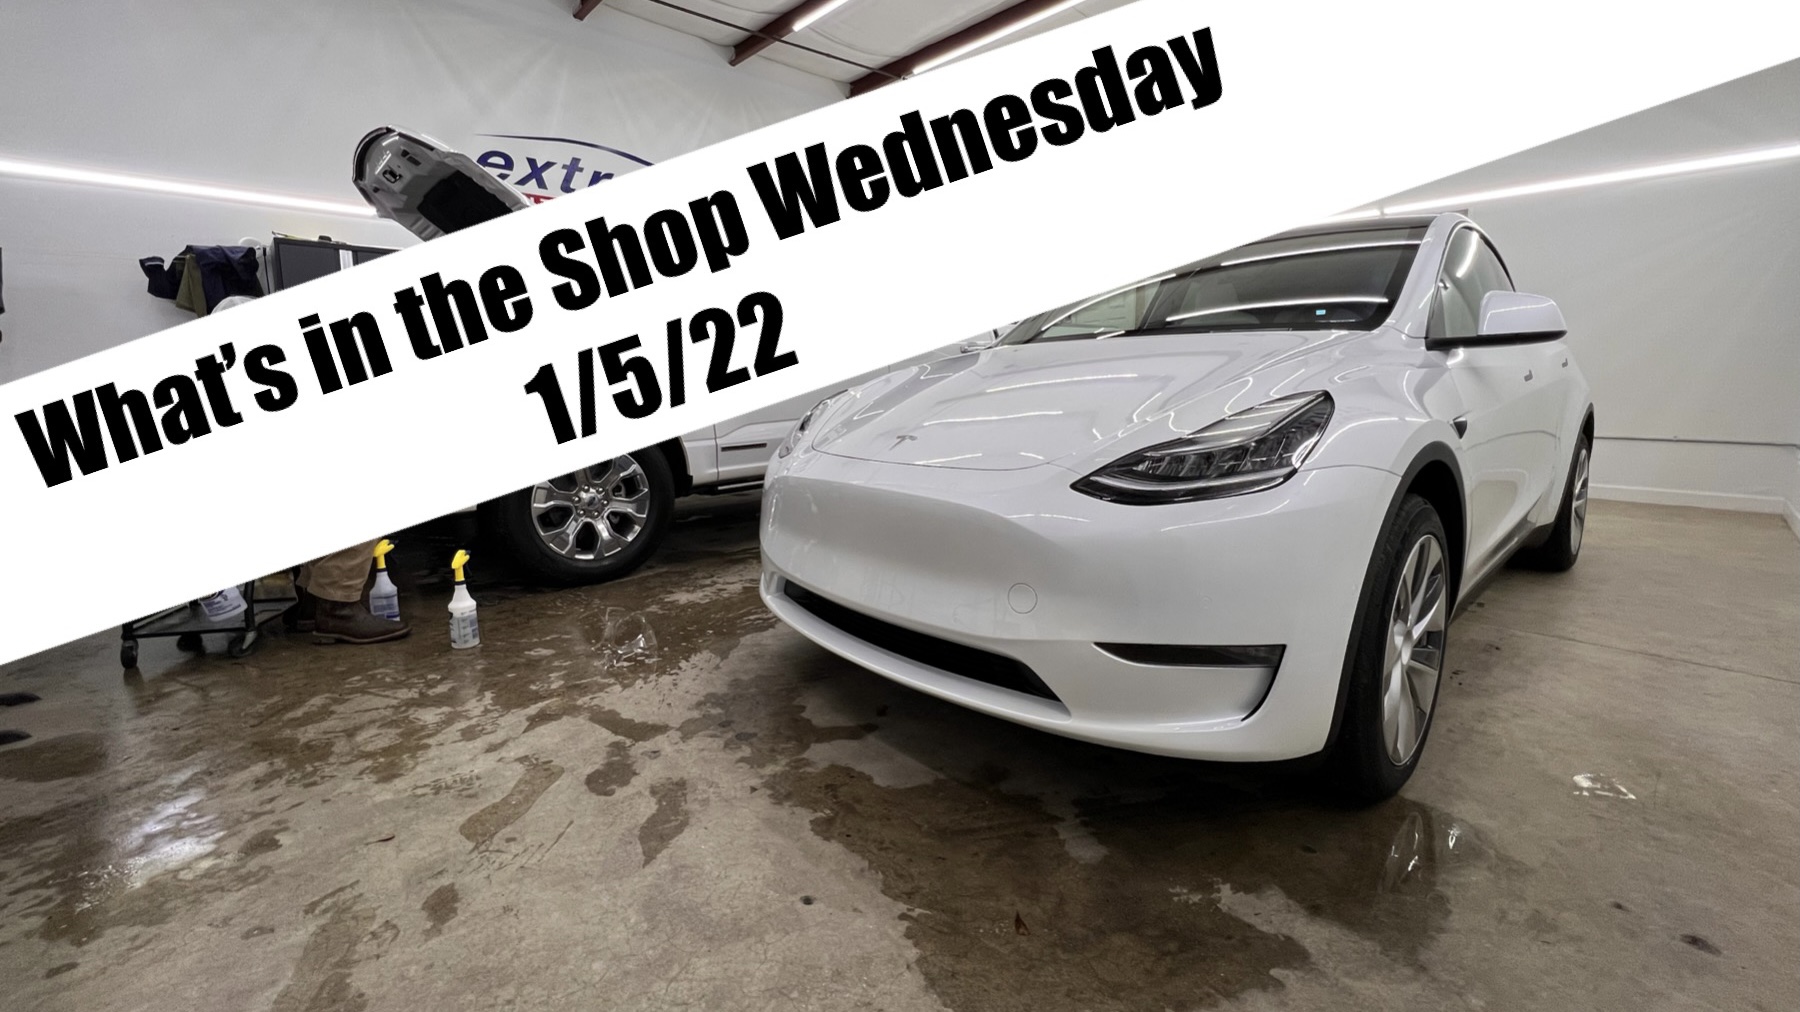 What’s in the Shop Wednesday 1/5/22